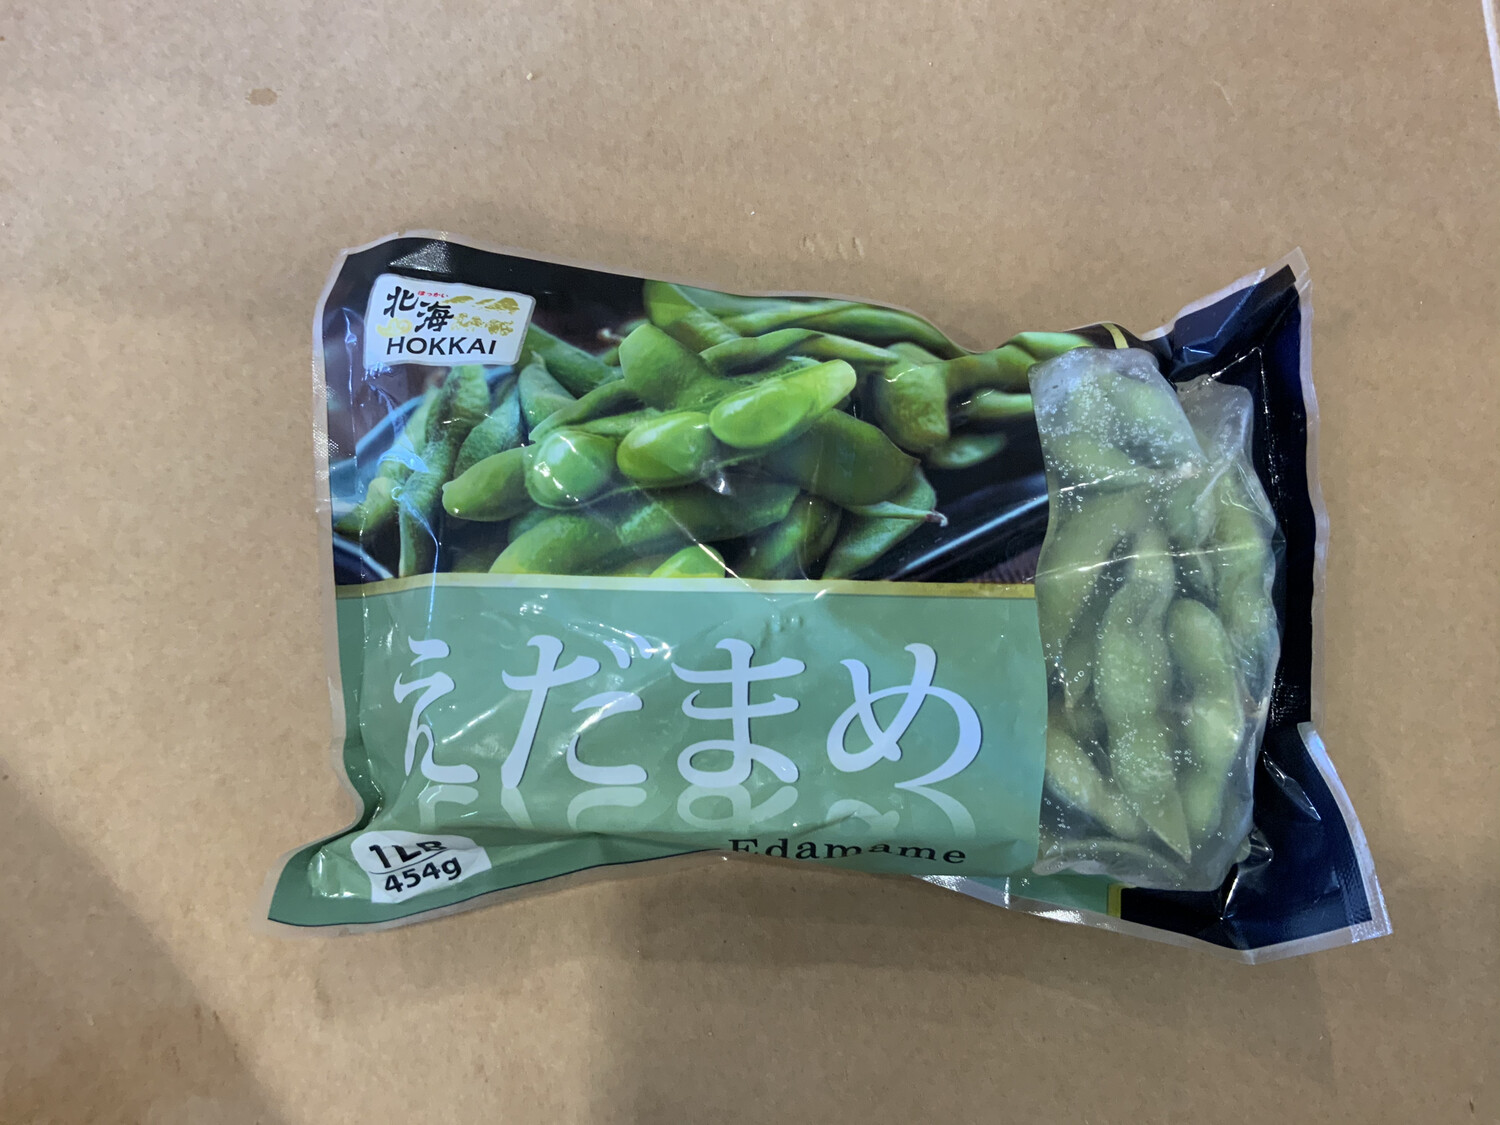 EDAMAME SOY BEANS IN PODS FROZEN